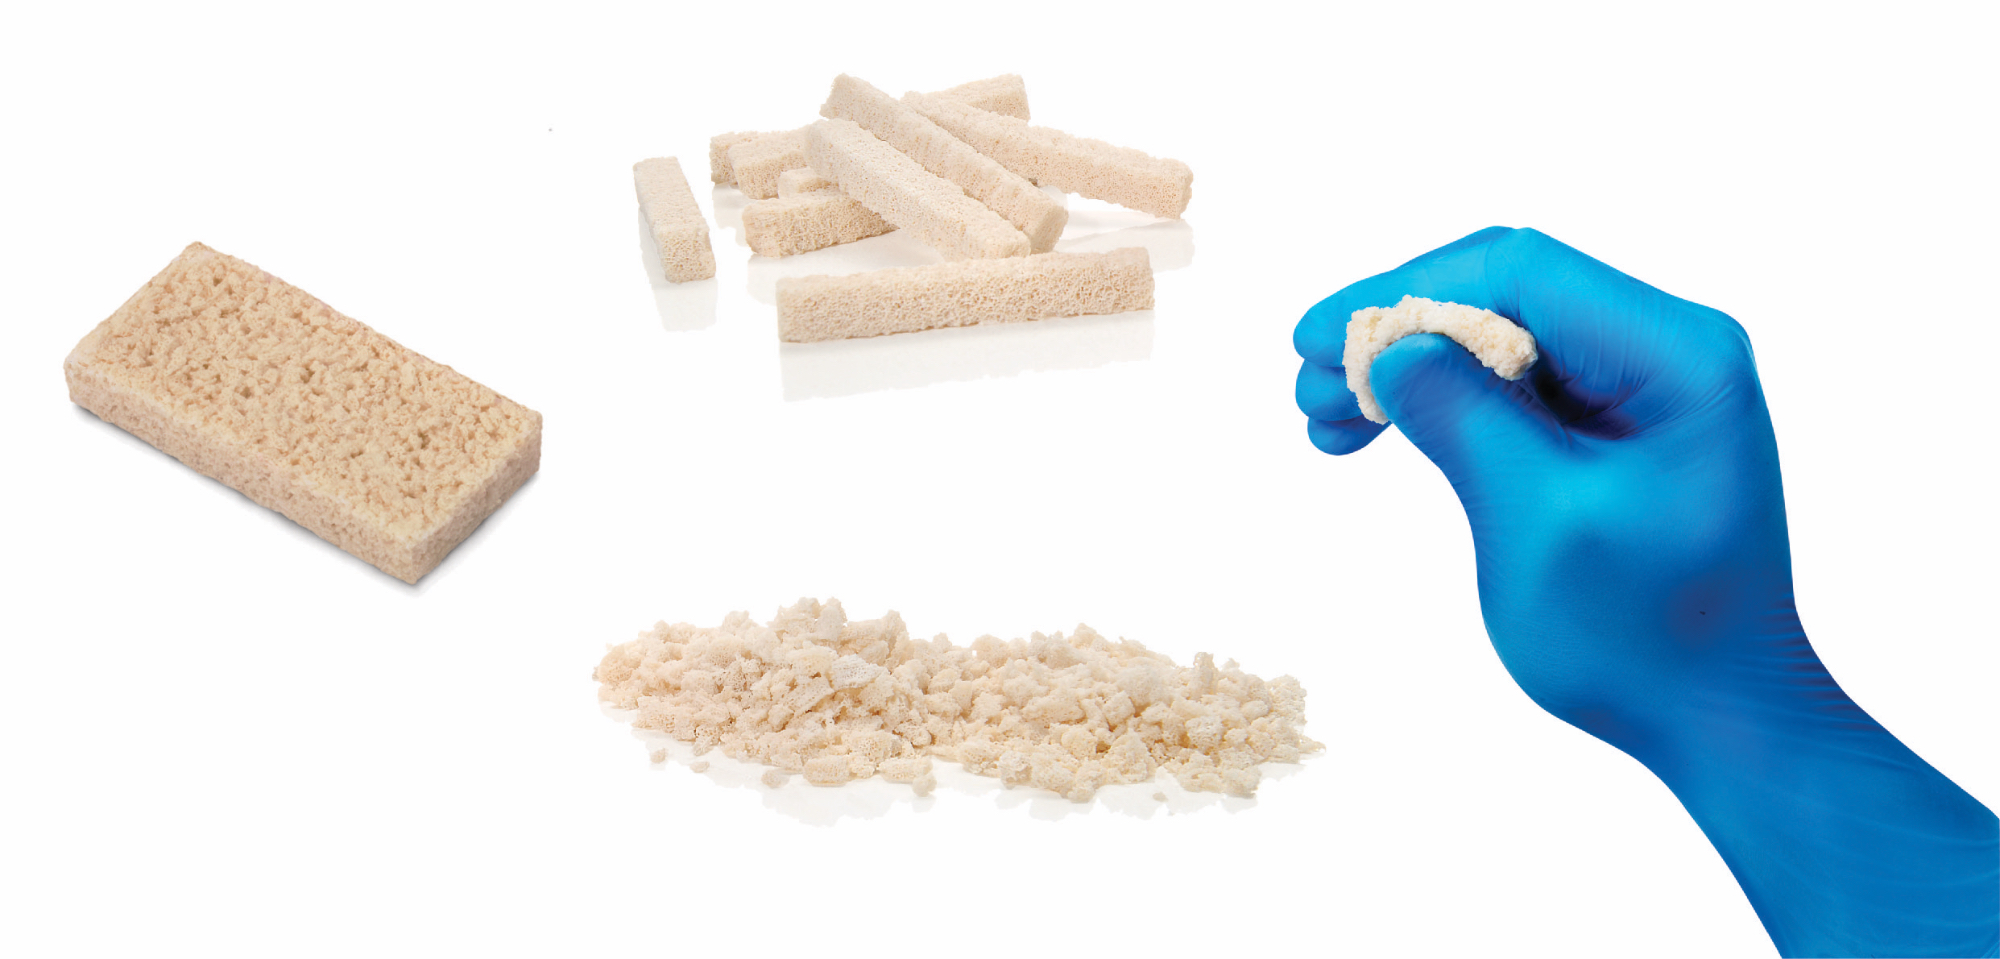 Various types of bone grafts including granules, blocks, putty, and strips/sheets.